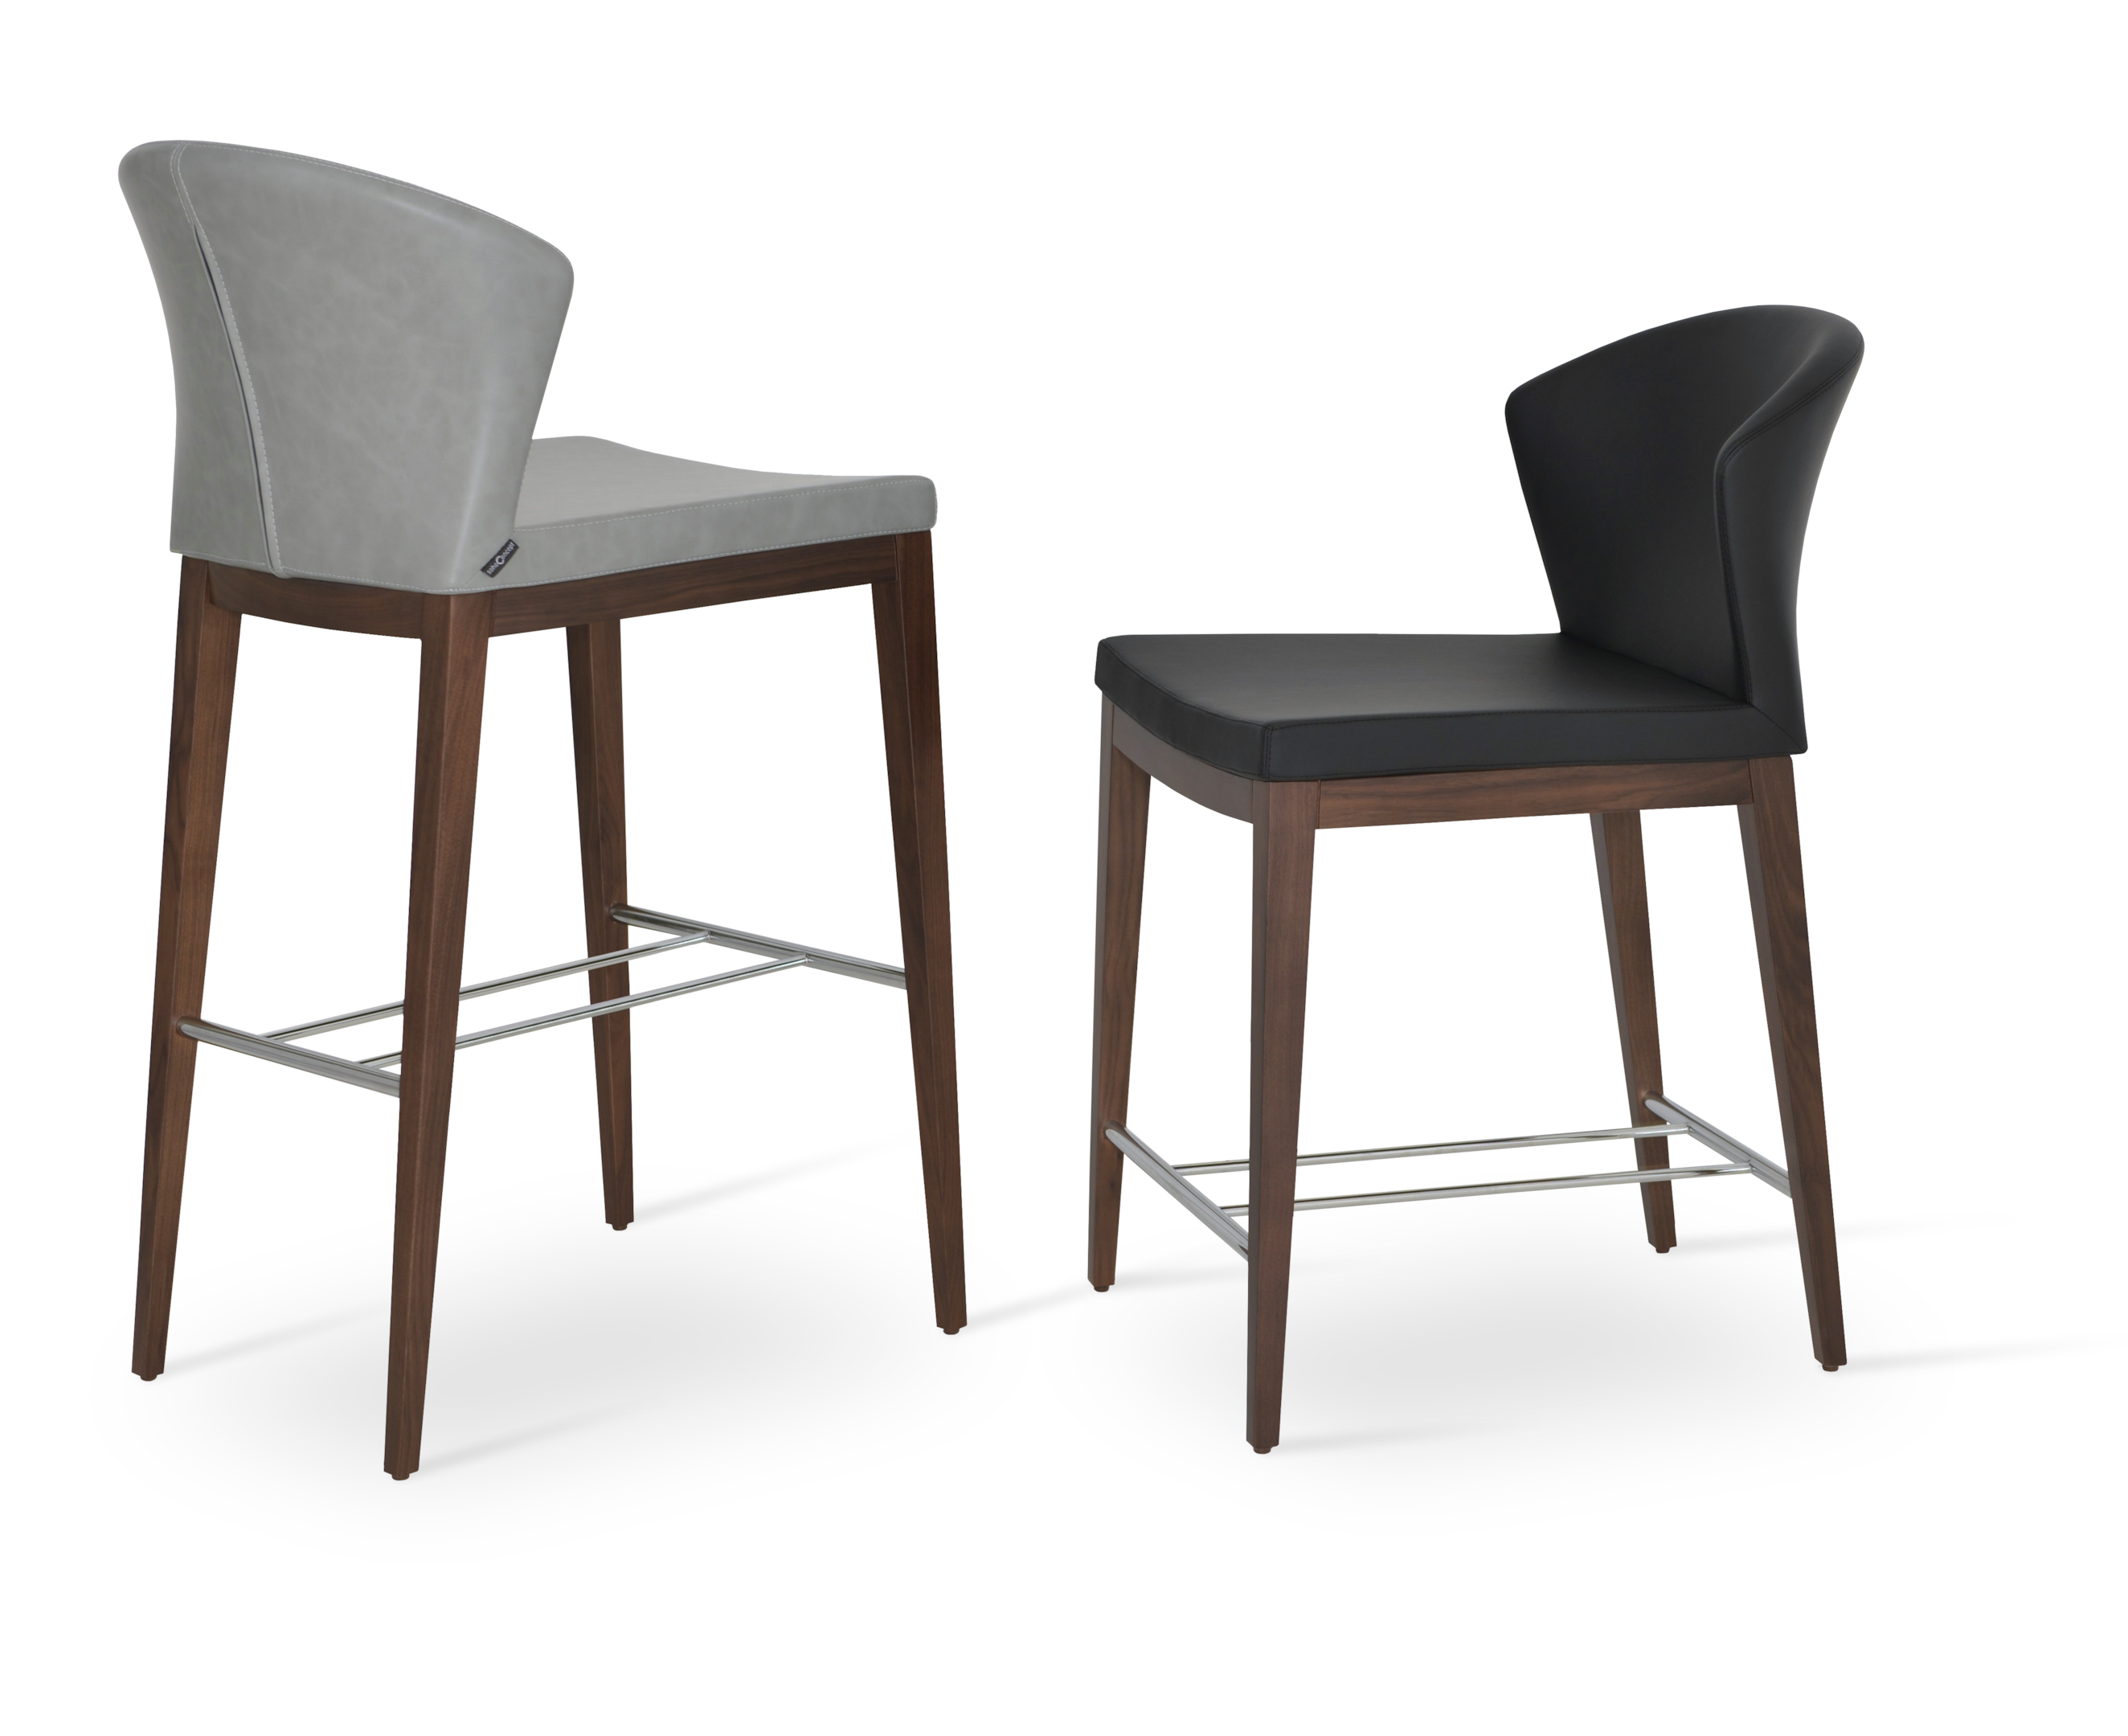 Common materials for bar chairs